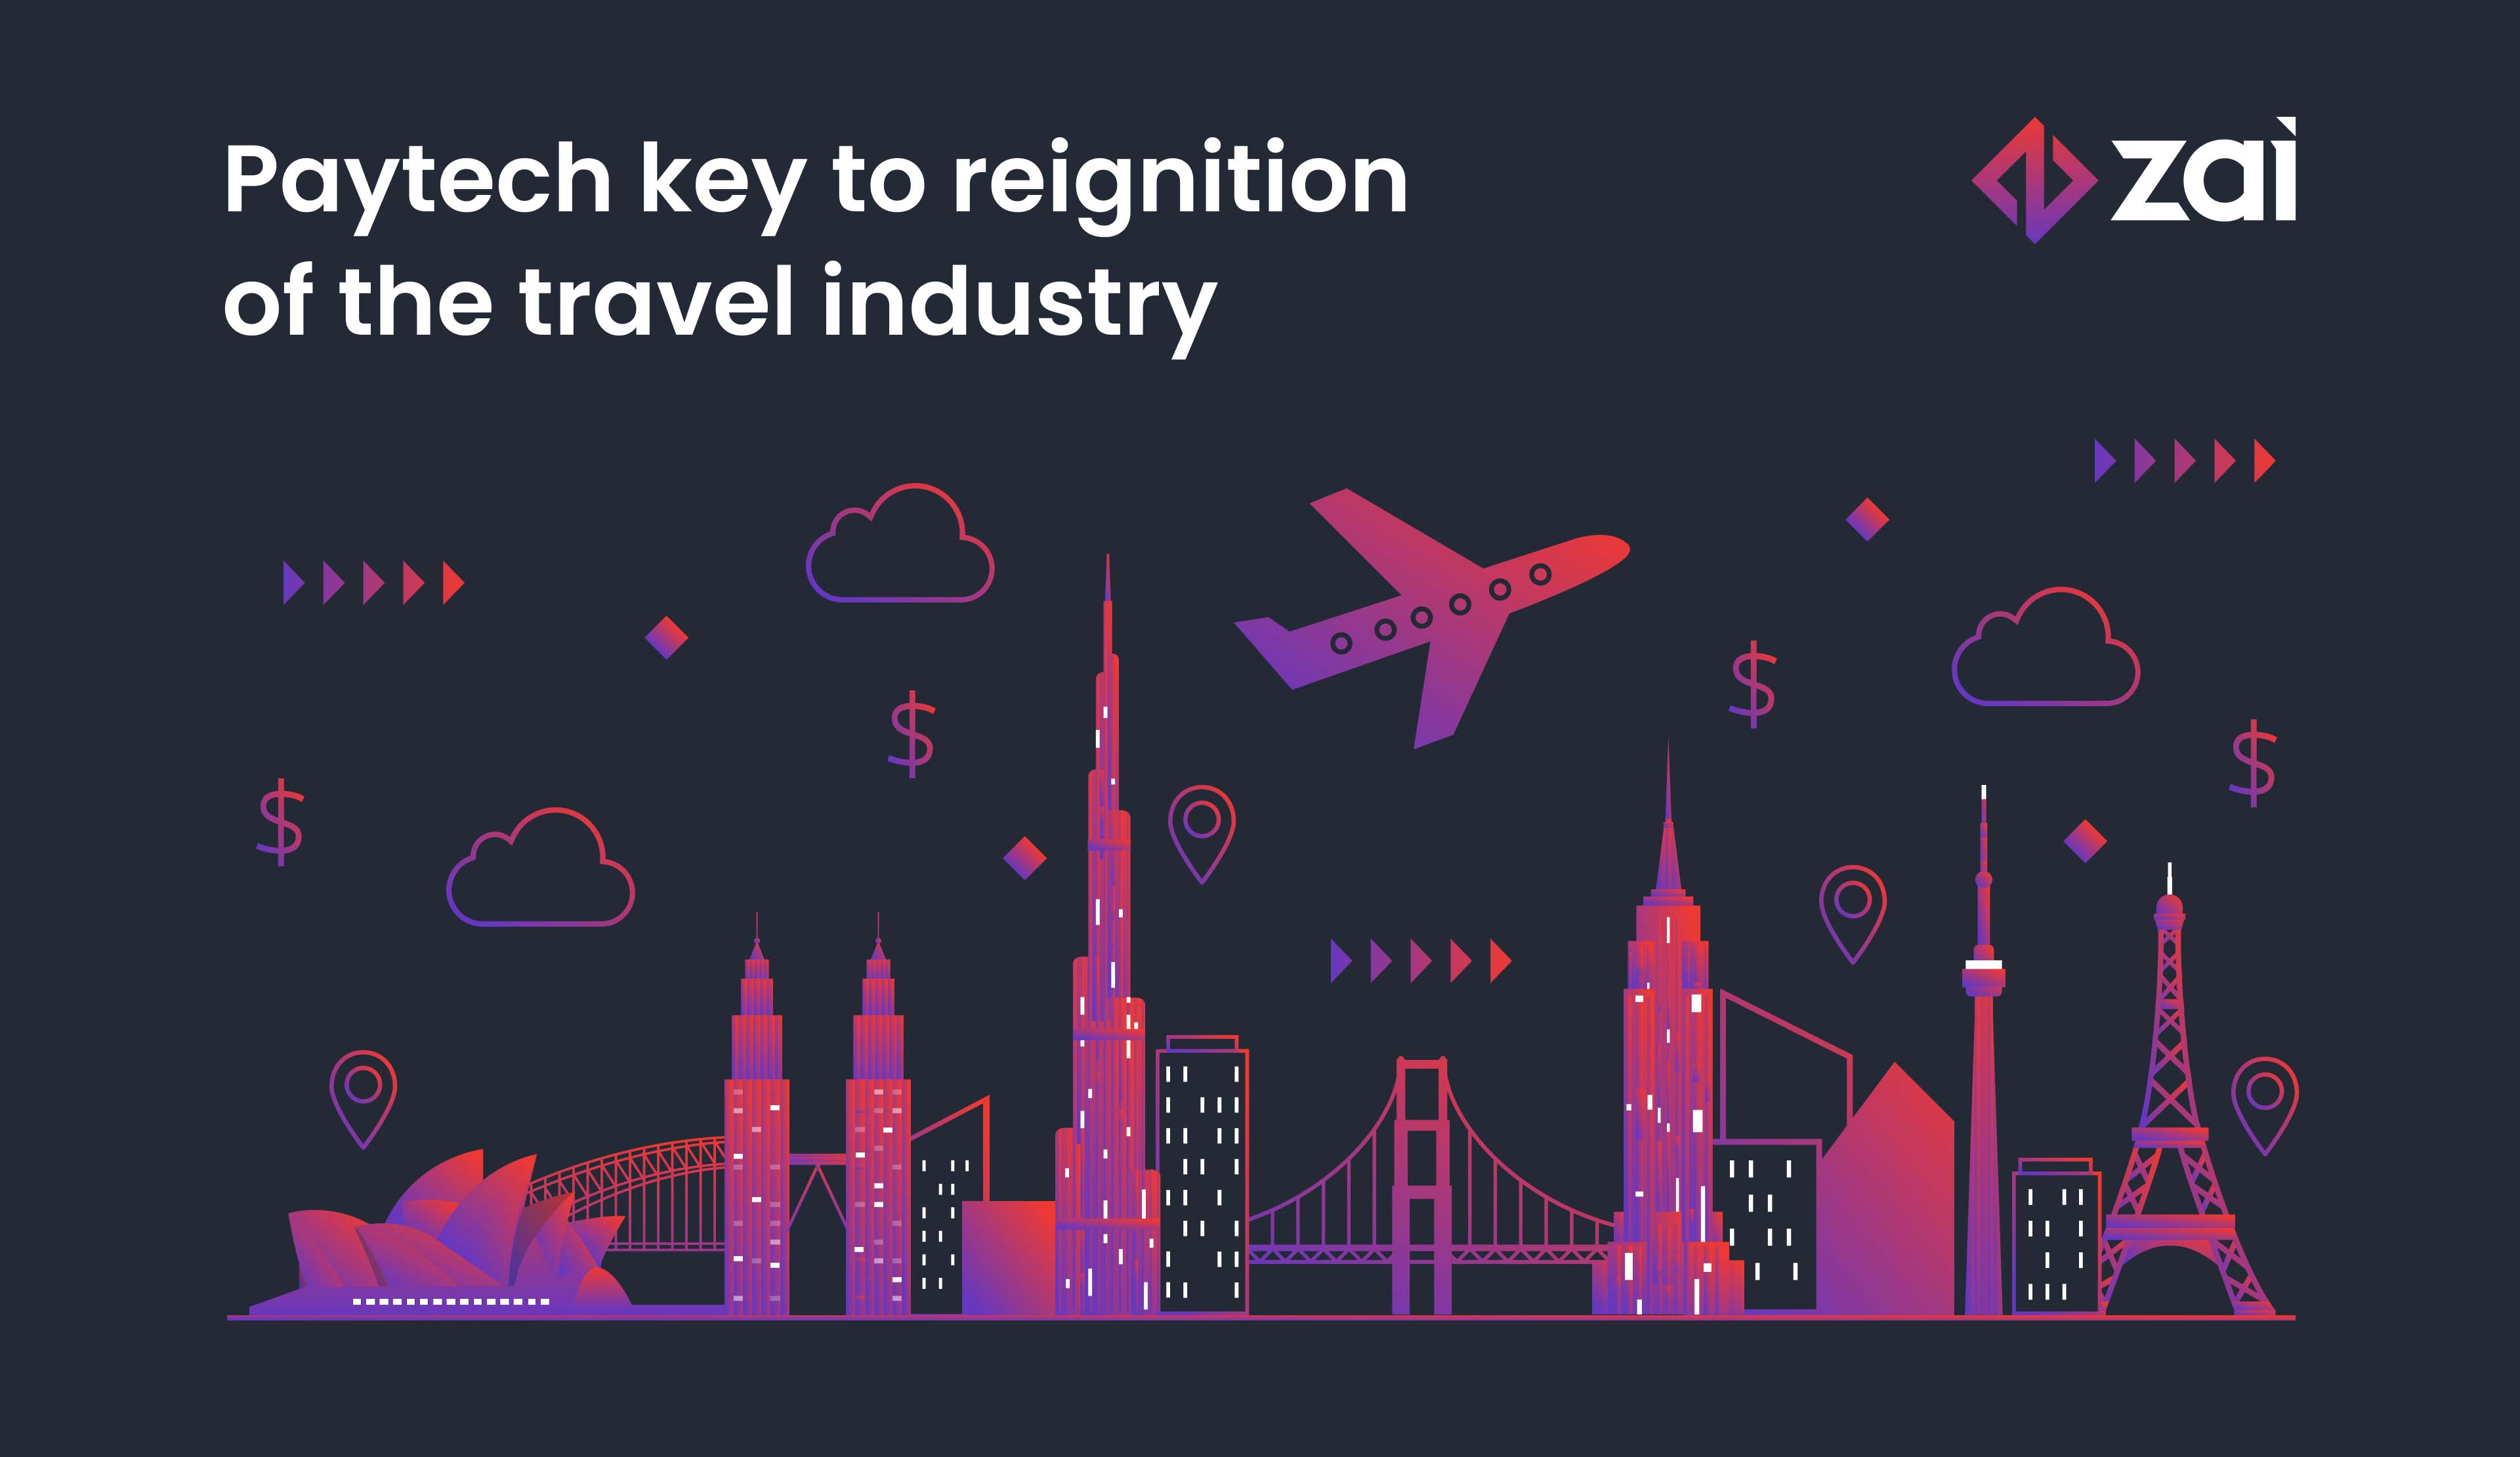 Paytech key to reignition of the travel industry